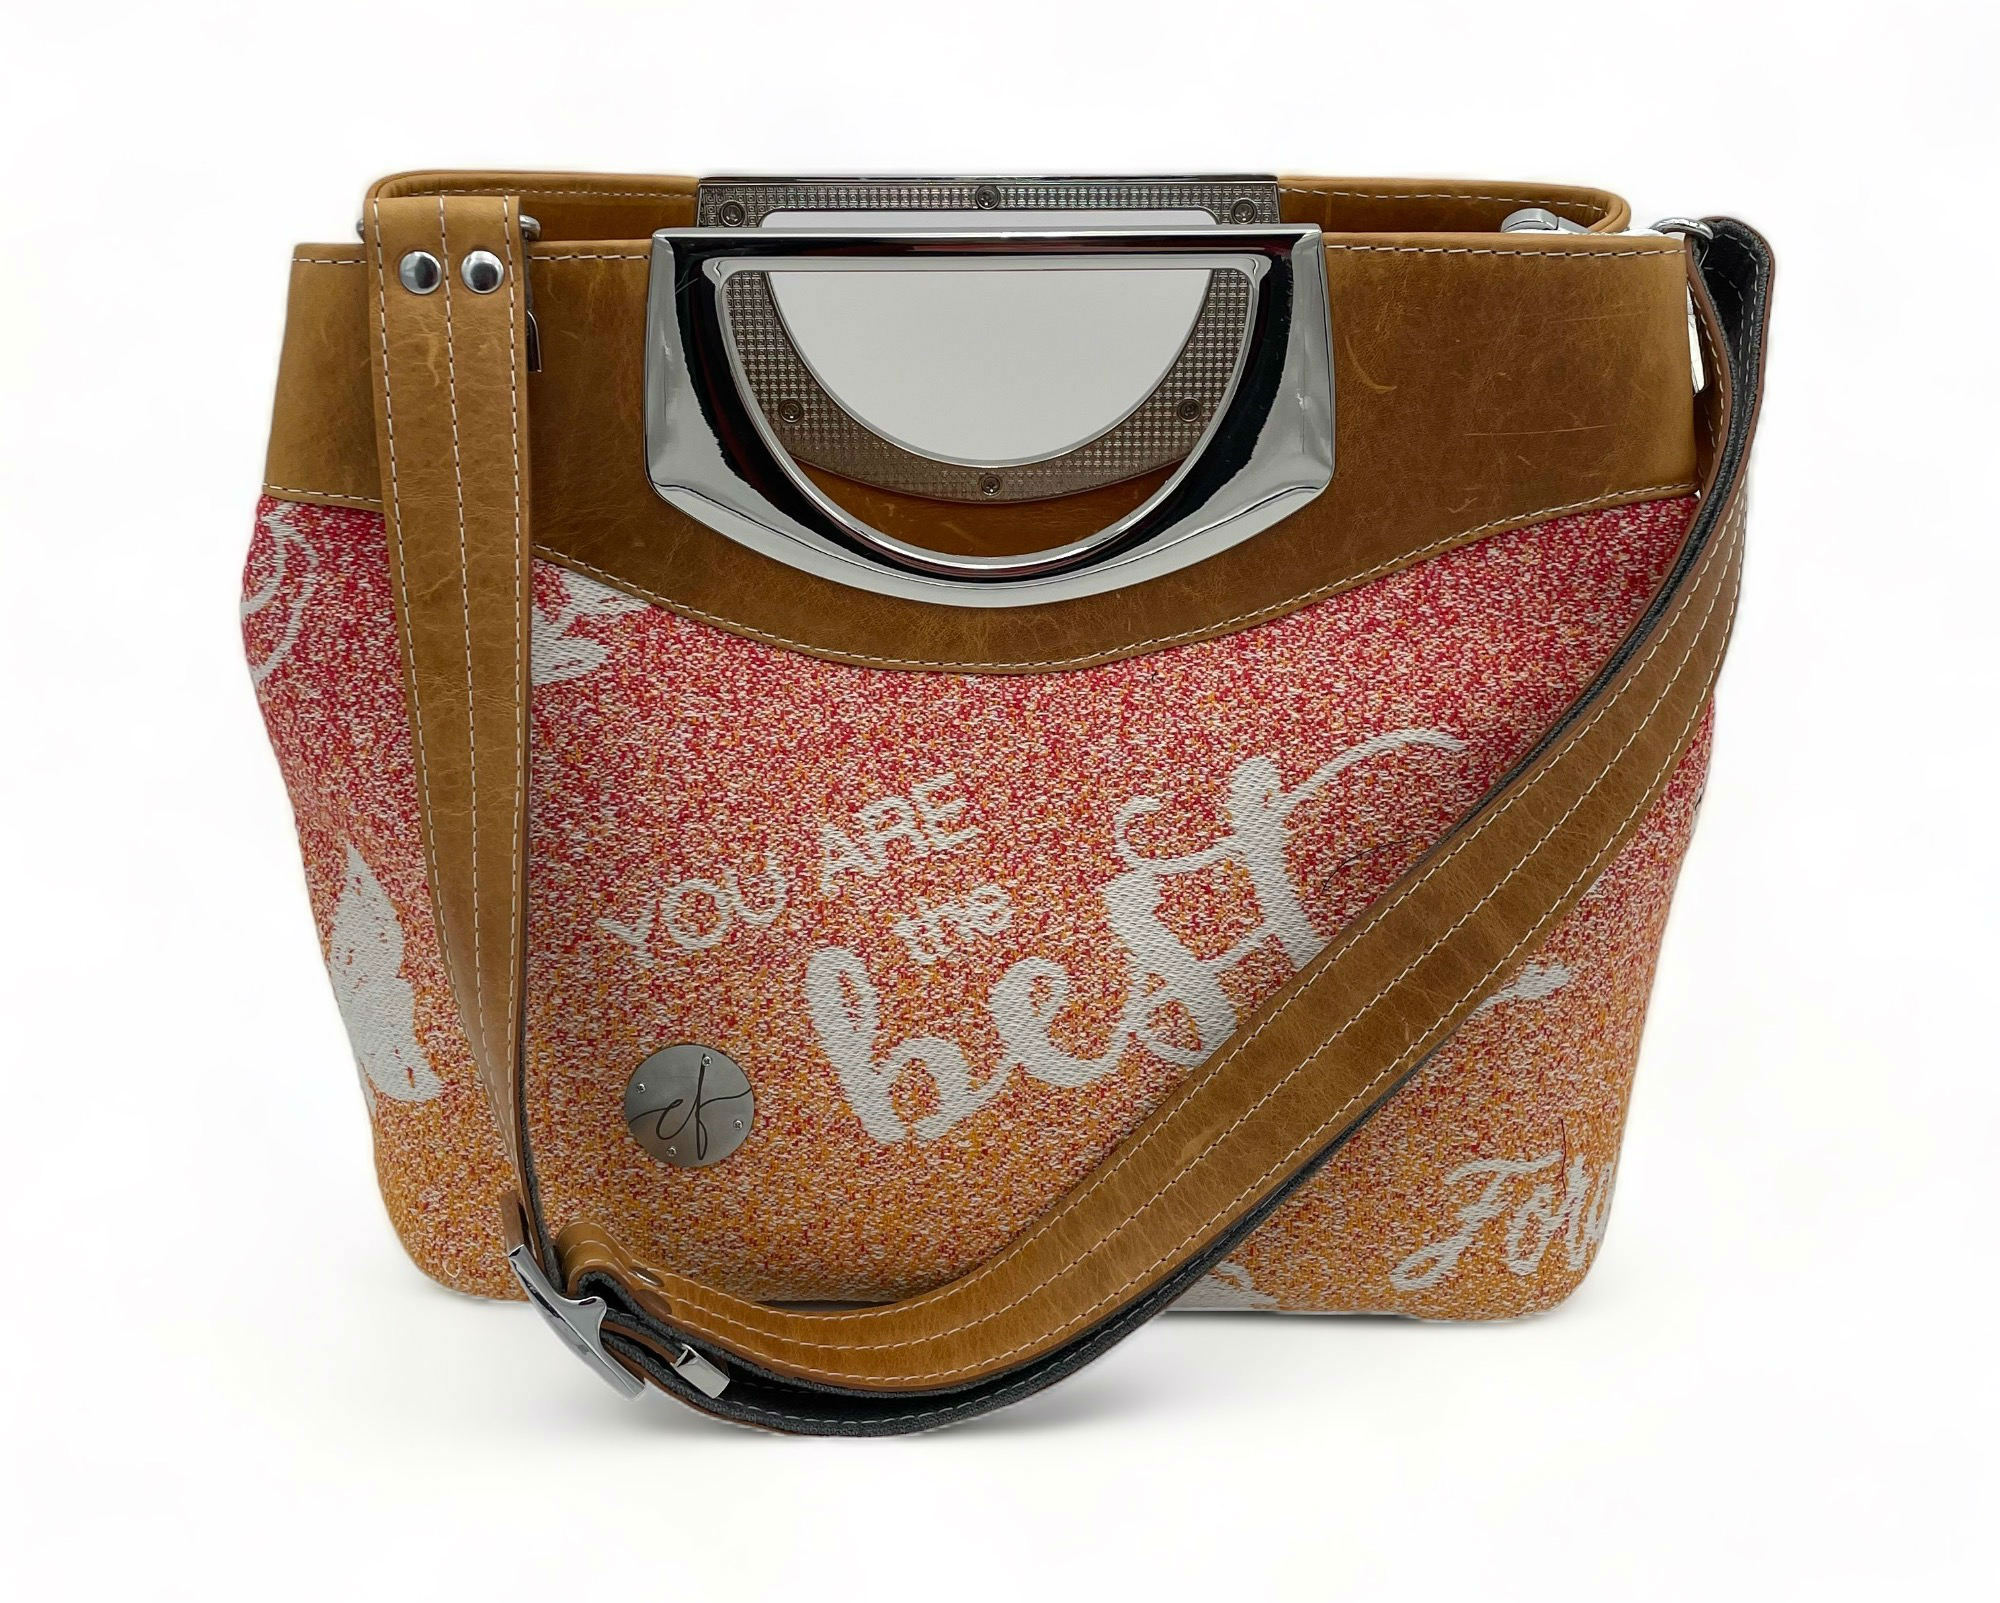 'Empuissancement', an ultra-luxury shoulder bag with its high-quality materials and meticulous finishes. A masterpiece about women, reflecting both their strength and delicacy, sophistication, and simplicity. Made of organic-certified caramel-colored cowhide and a babywearing wrap with inspiring white text on a gradient background of summer colors.